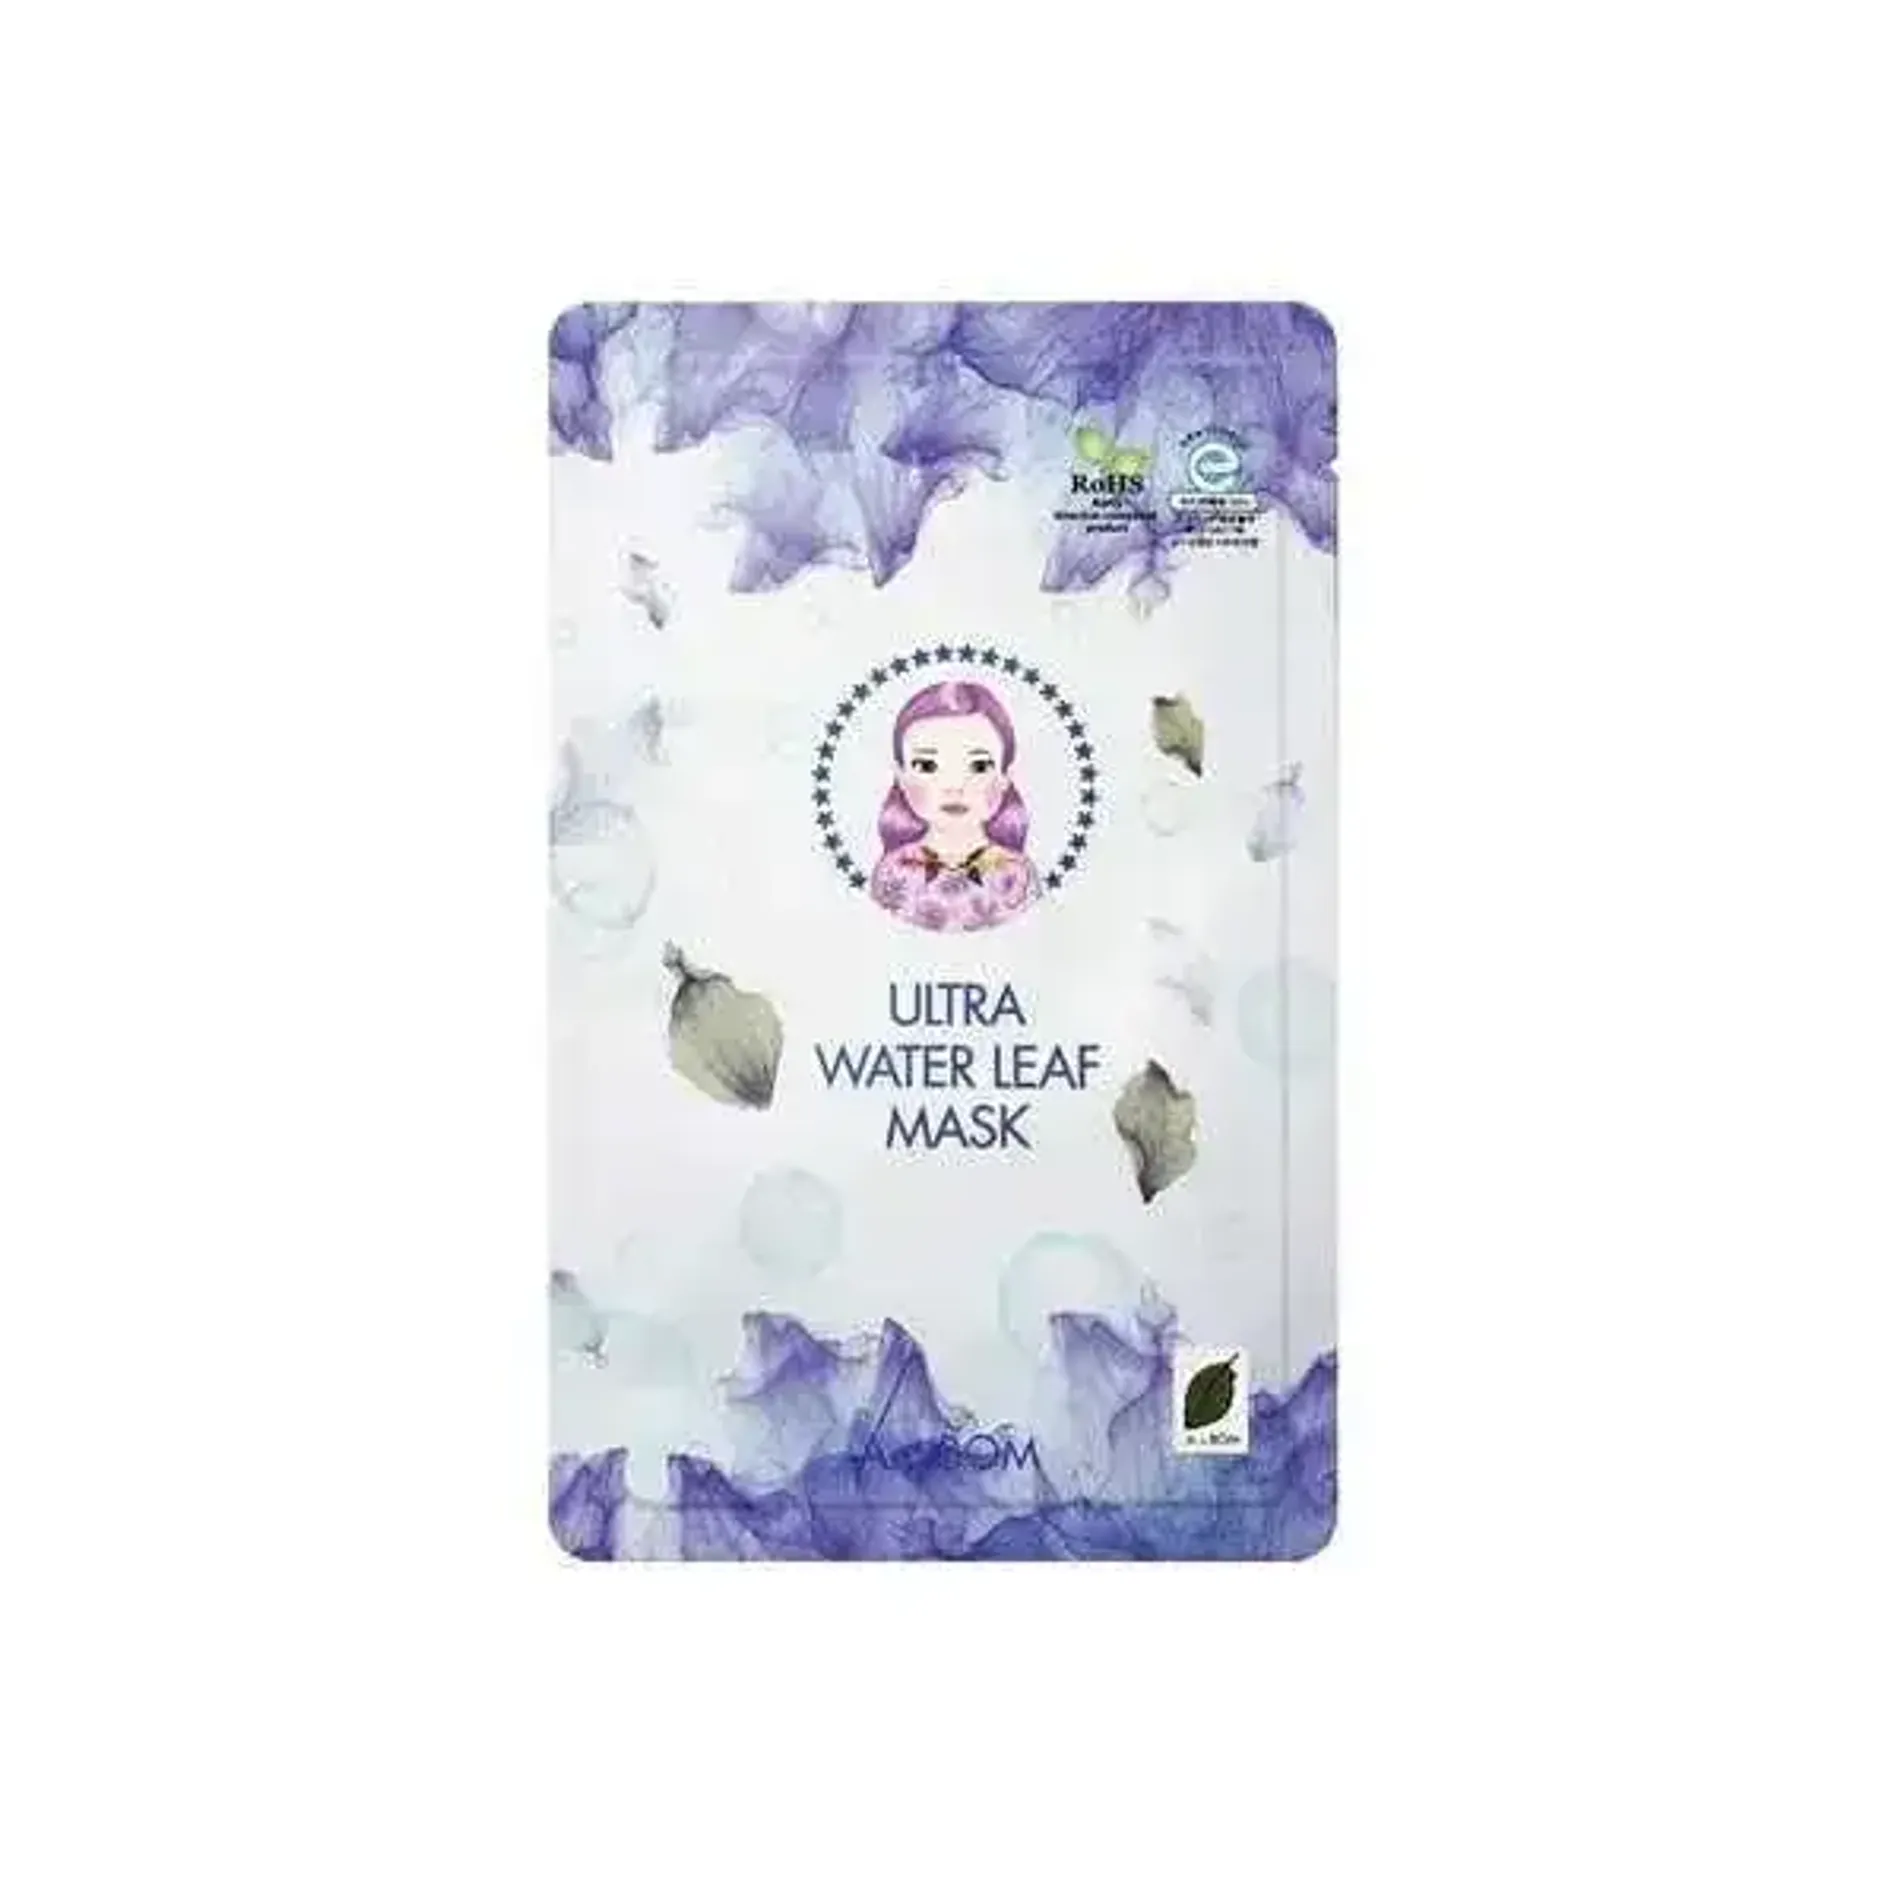 mat-na-giay-a-by-bom-ultra-water-leaf-mask-1-step-1